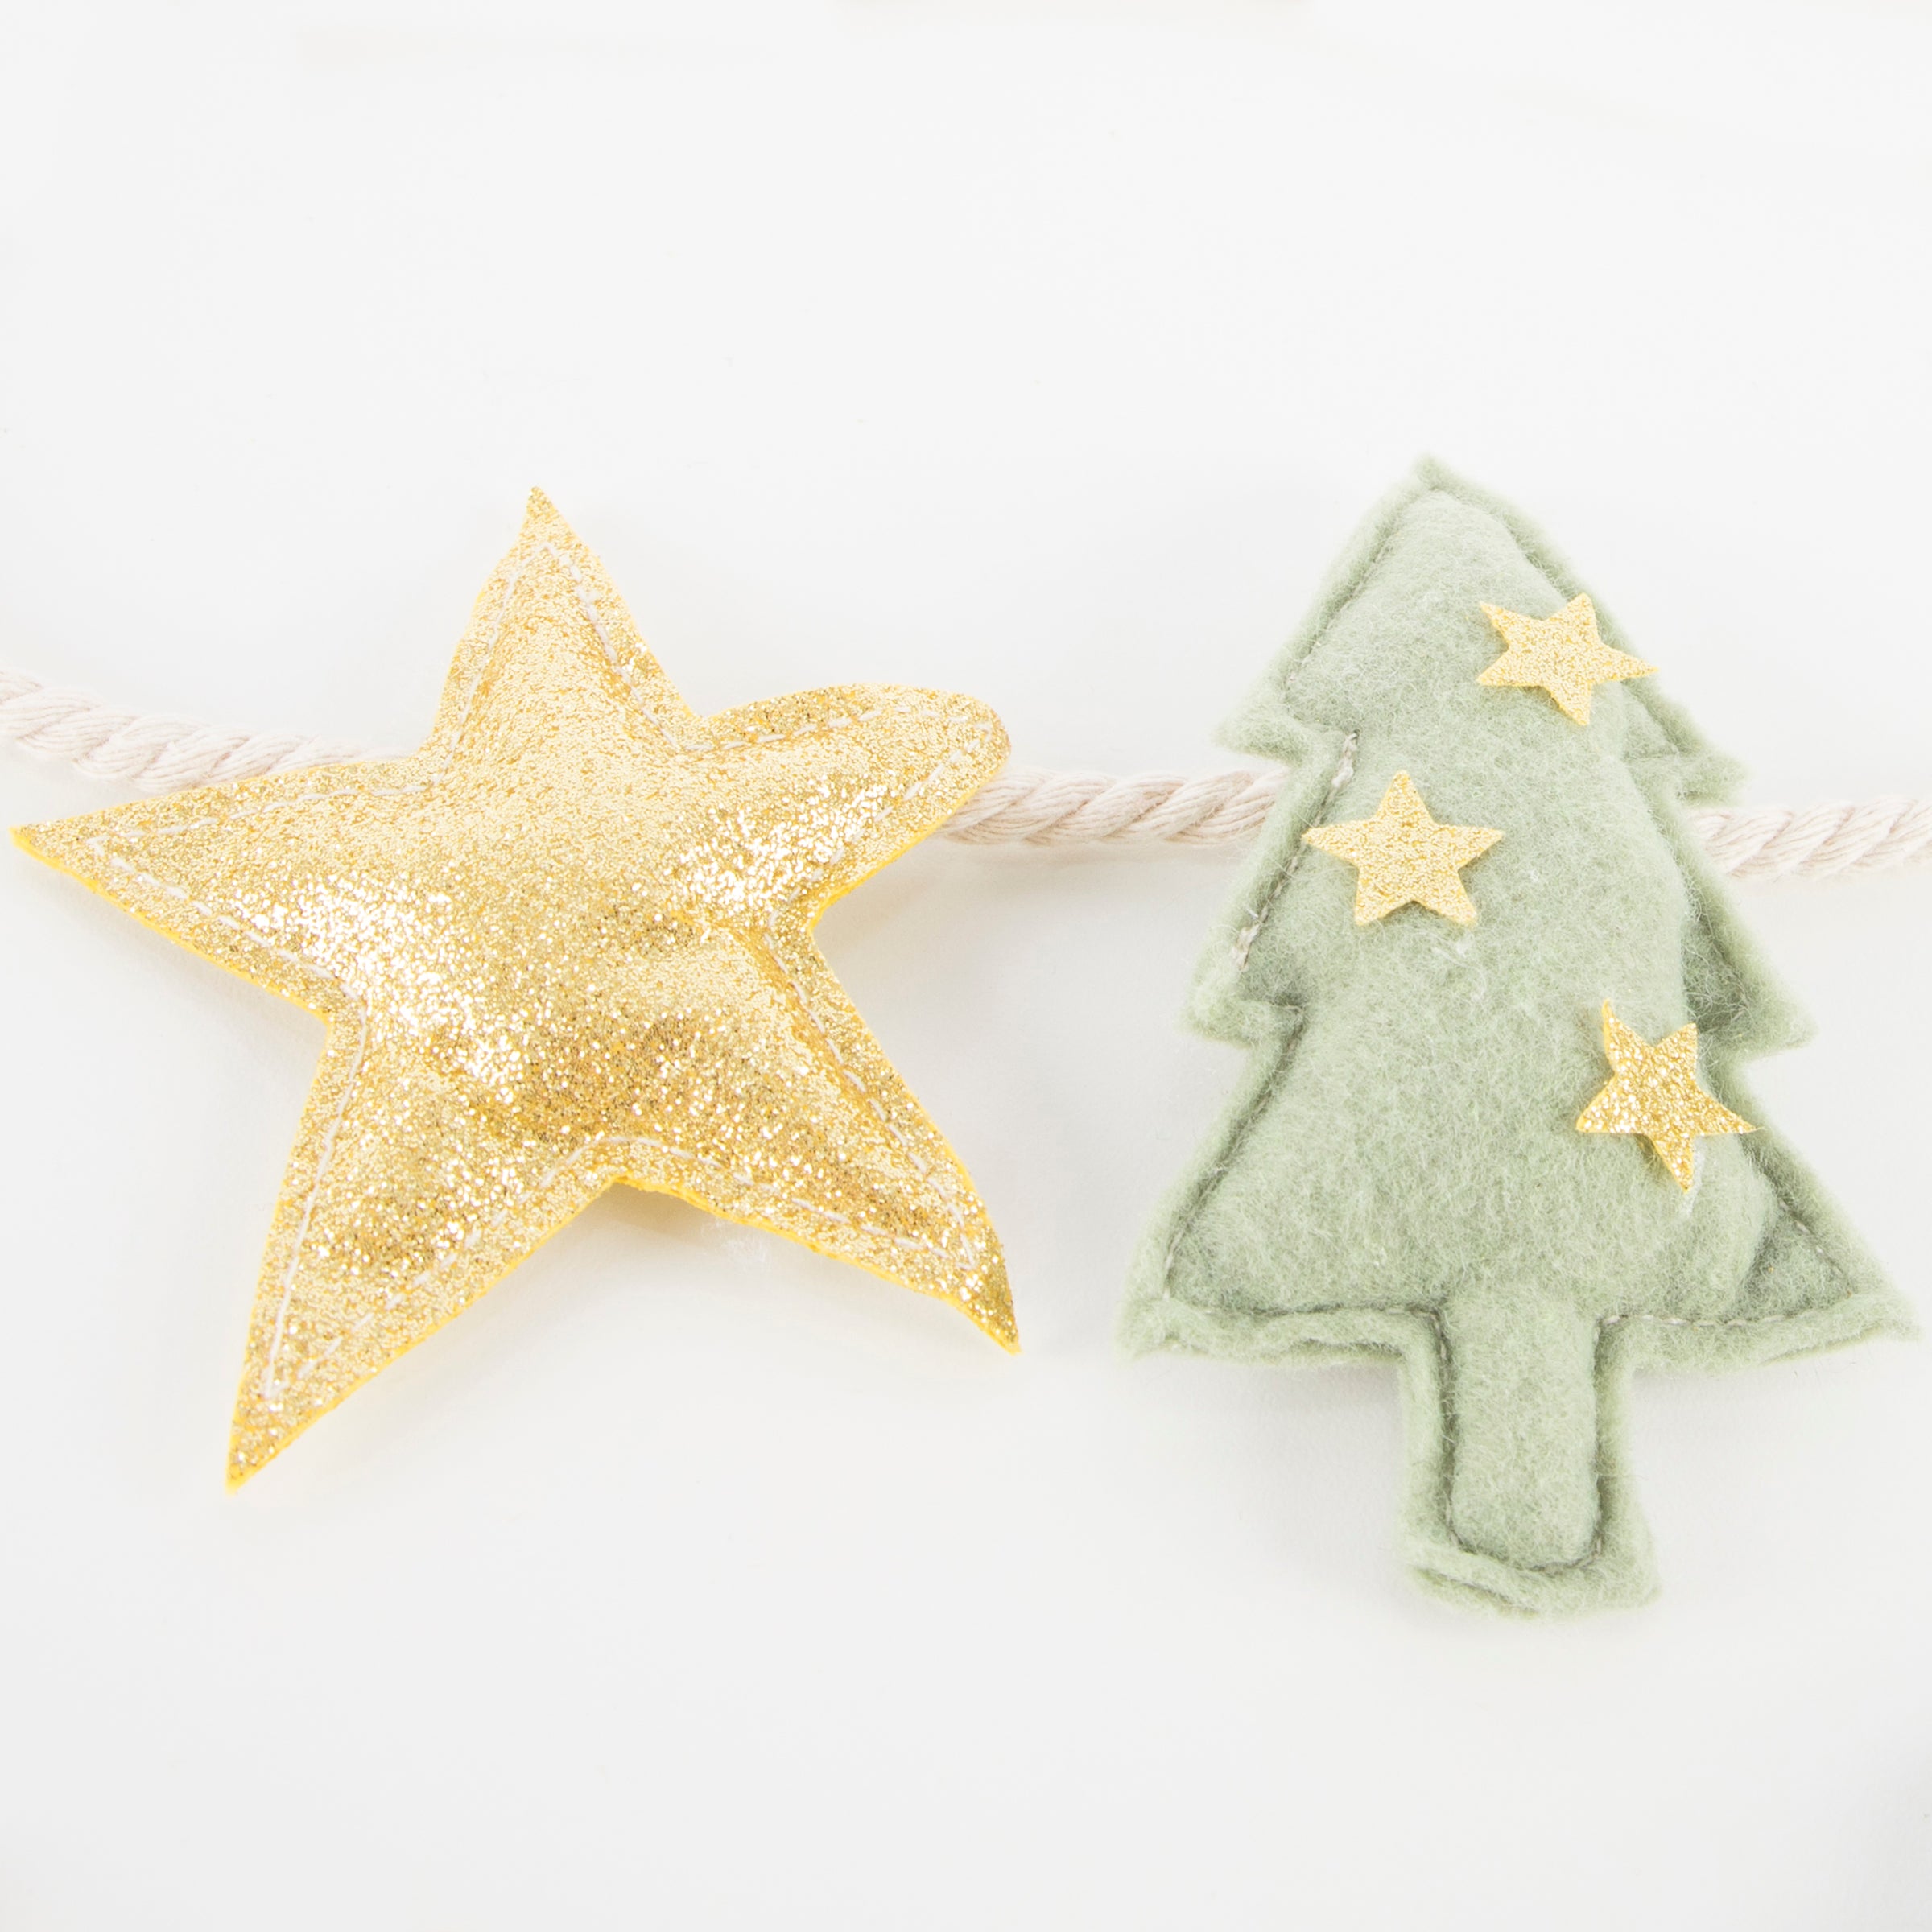 Our felt Christmas decoration garland is perfect to fill your home with festive cheer.